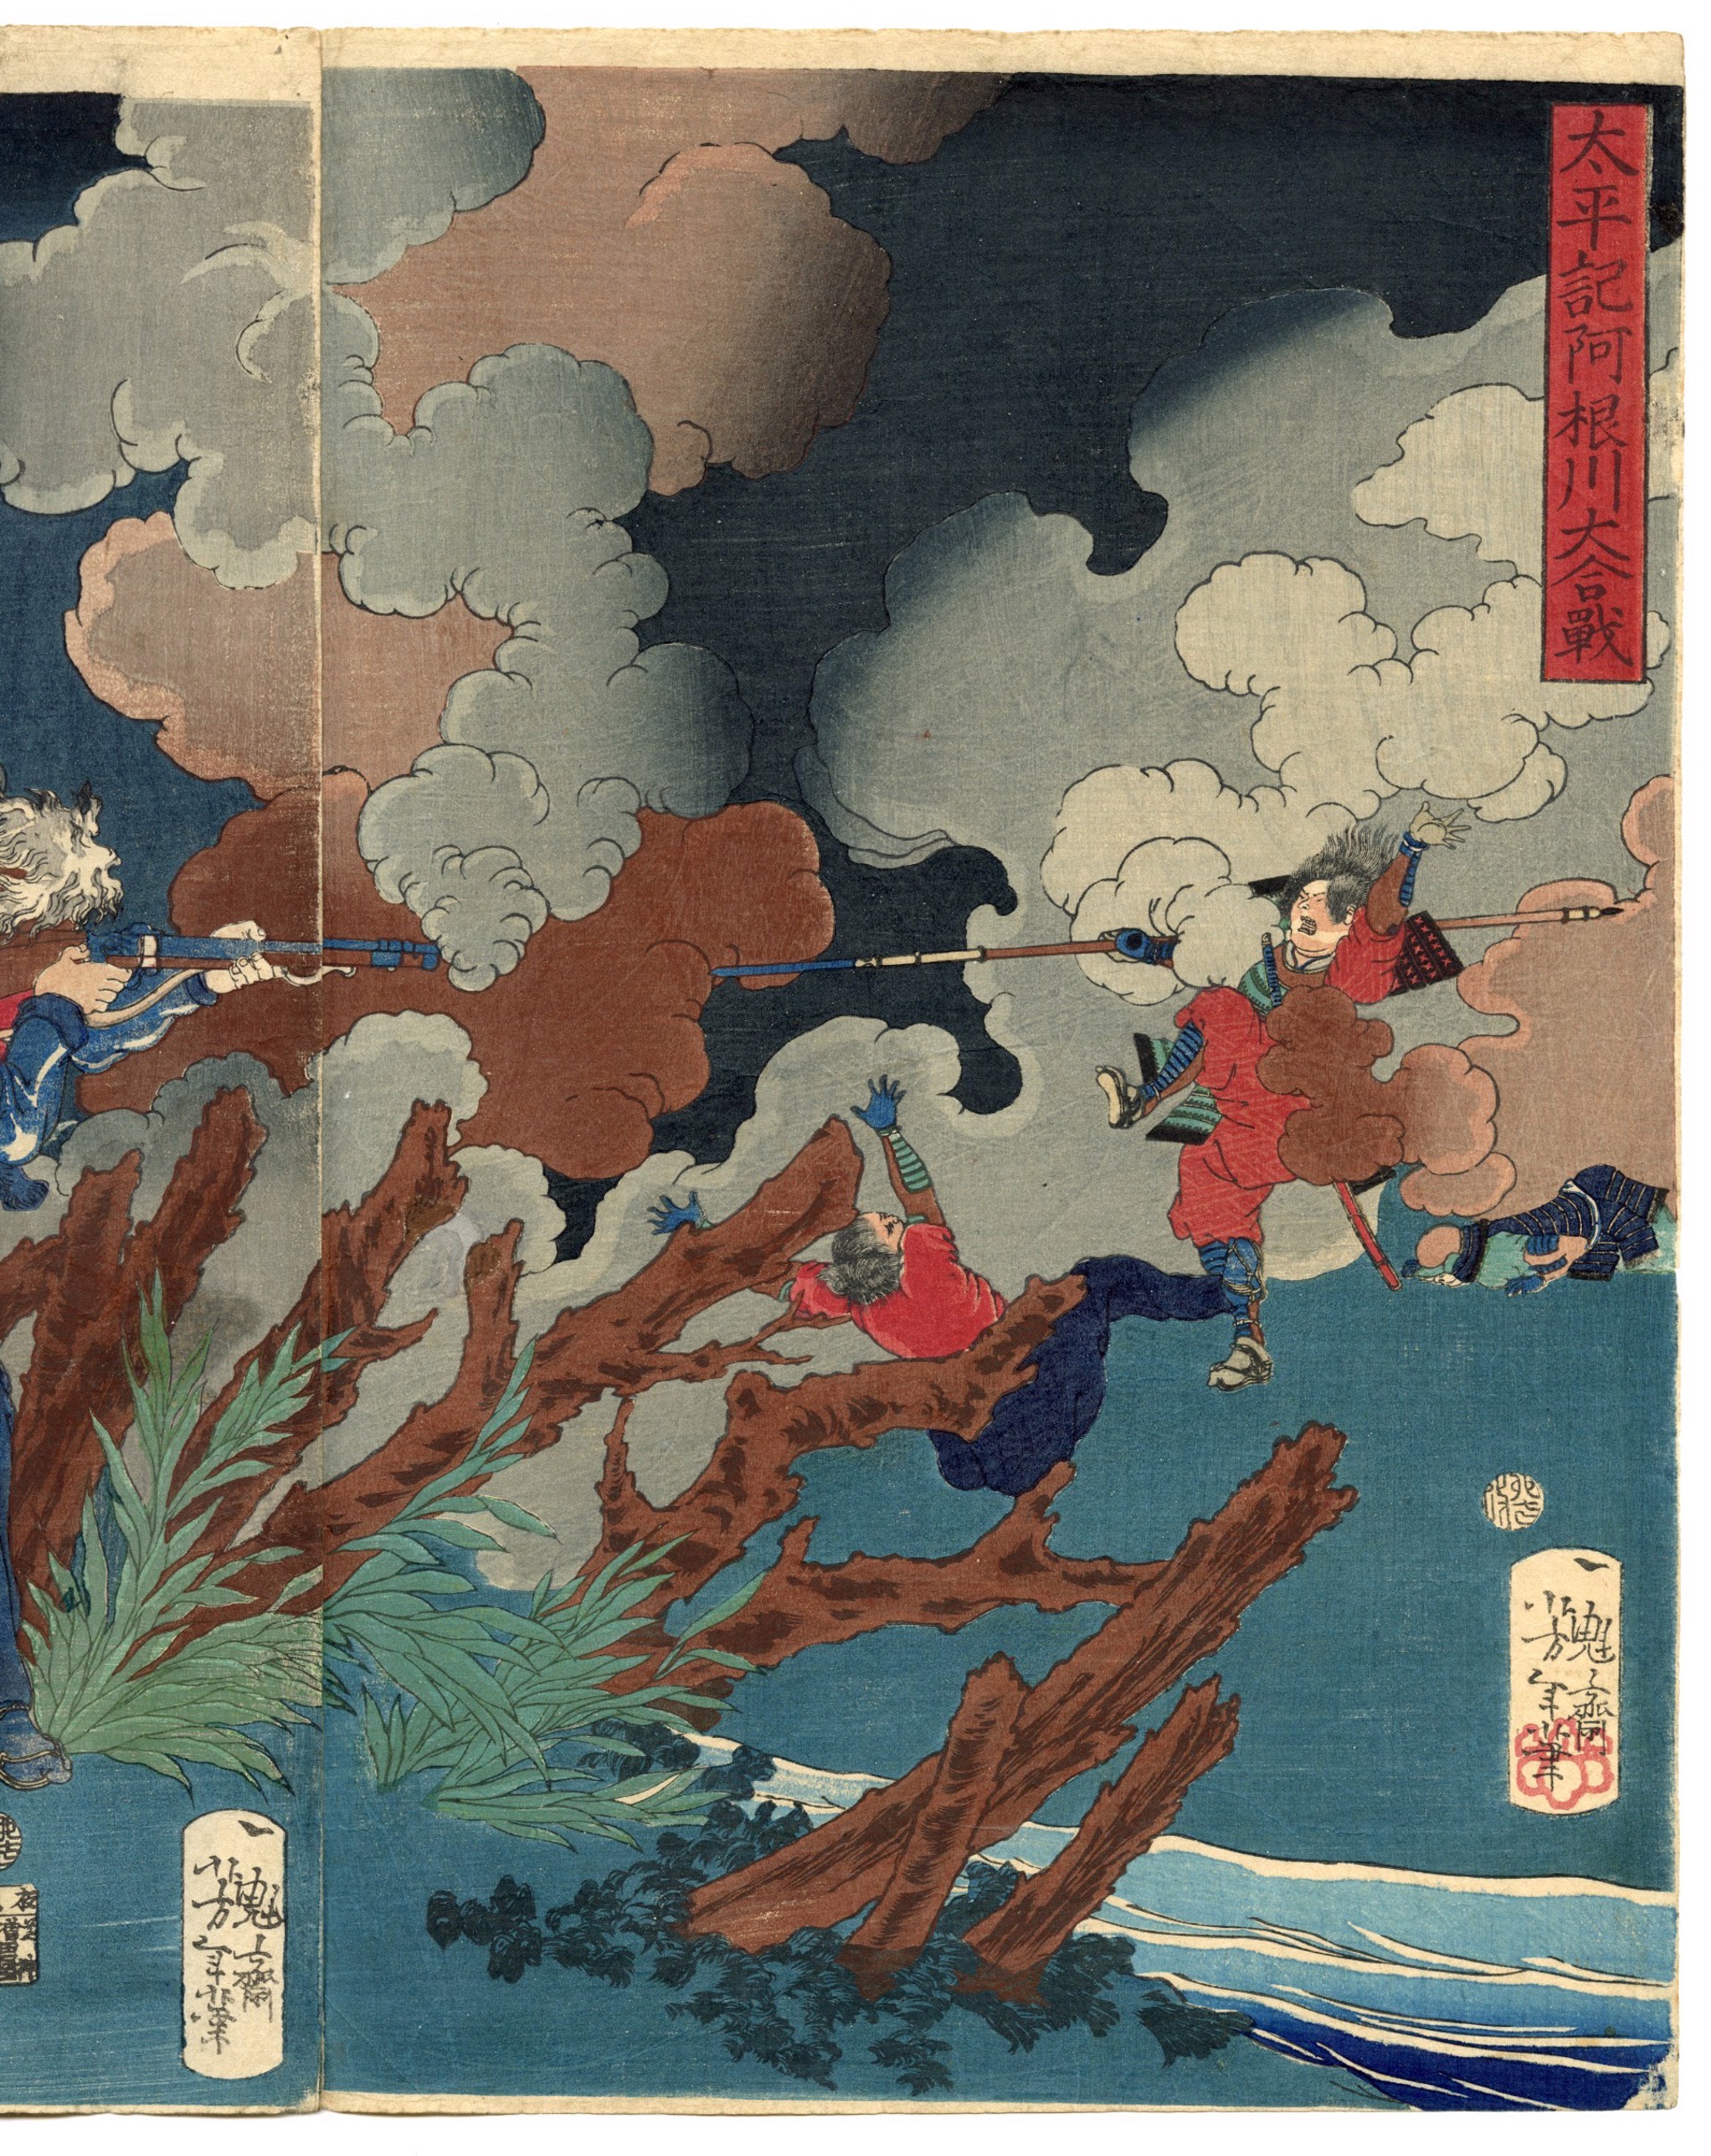 The Great Battle of the Ane River in the Taiheiki by Yoshitoshi